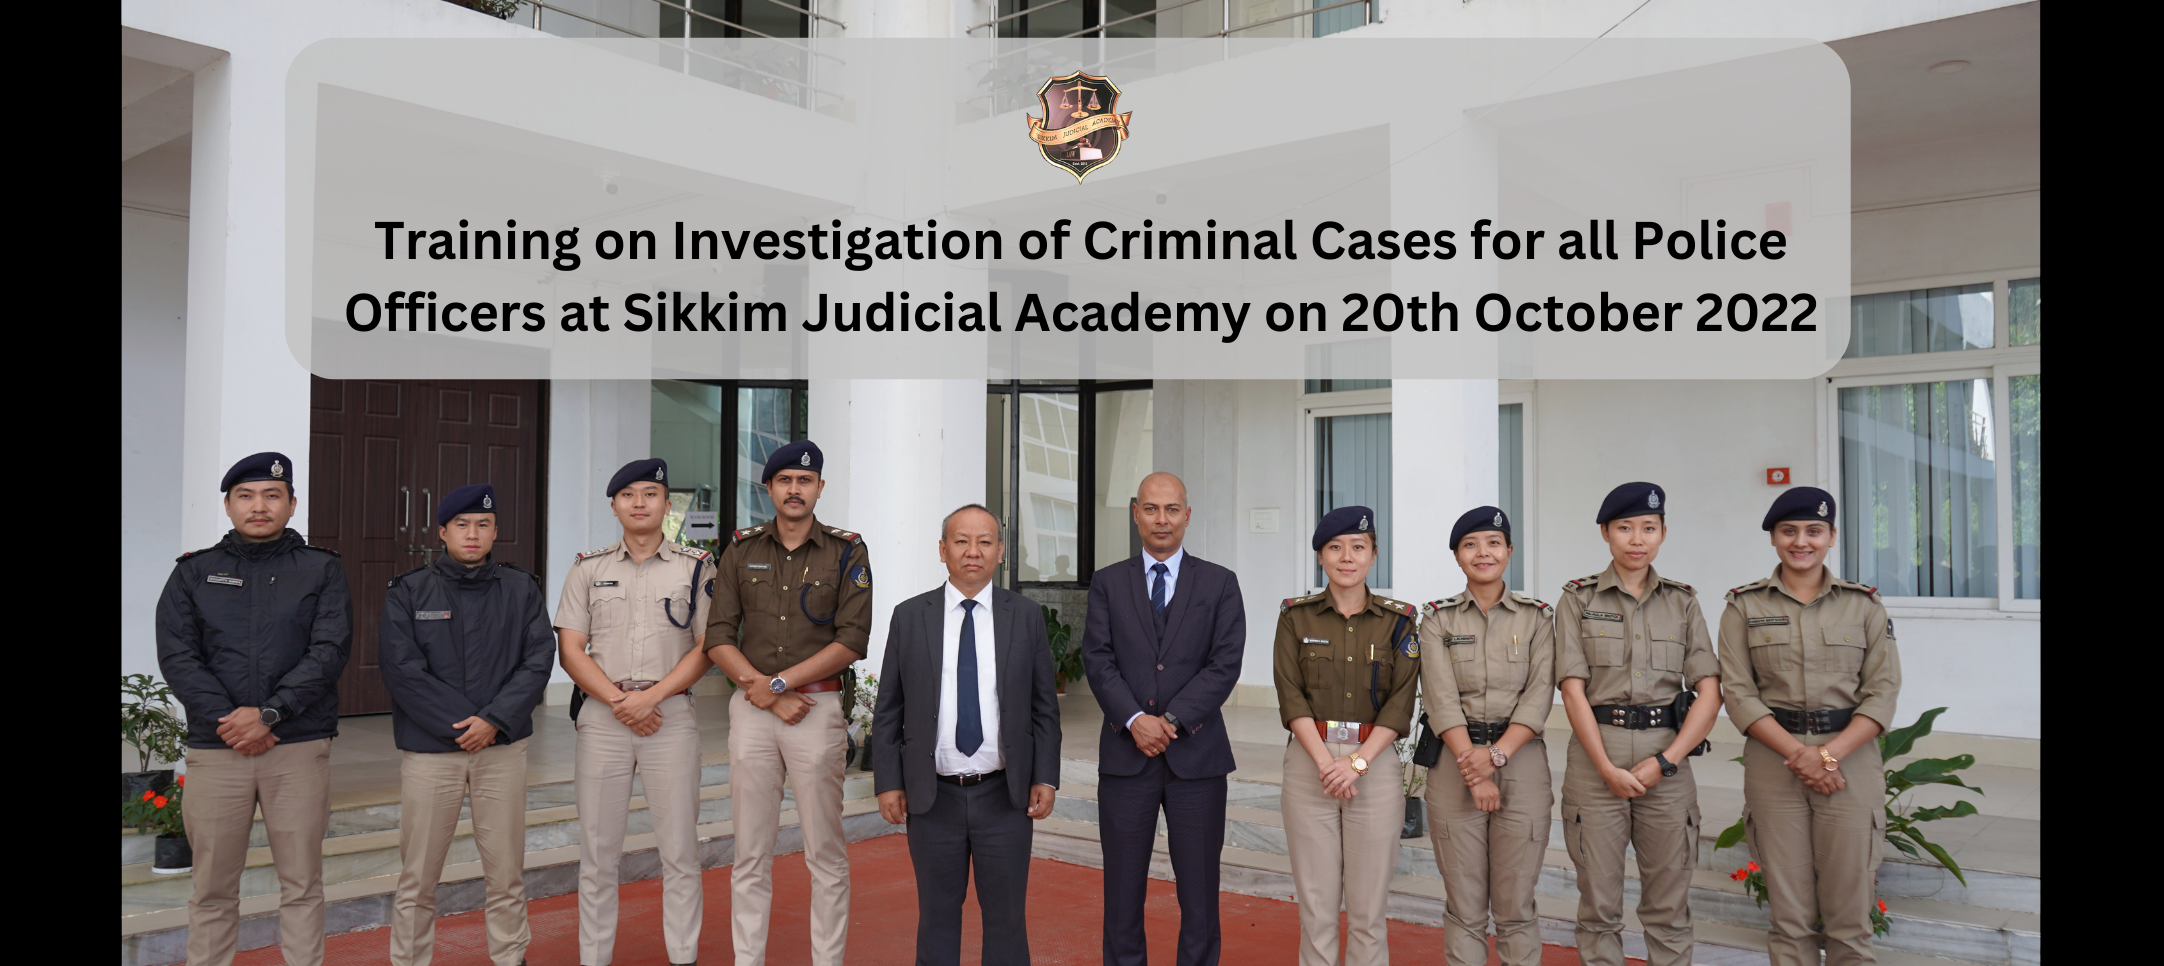 Training on Investigation of Criminal Cases for all Police Officers at Sikkim Judicial Academy on 20th October 2022